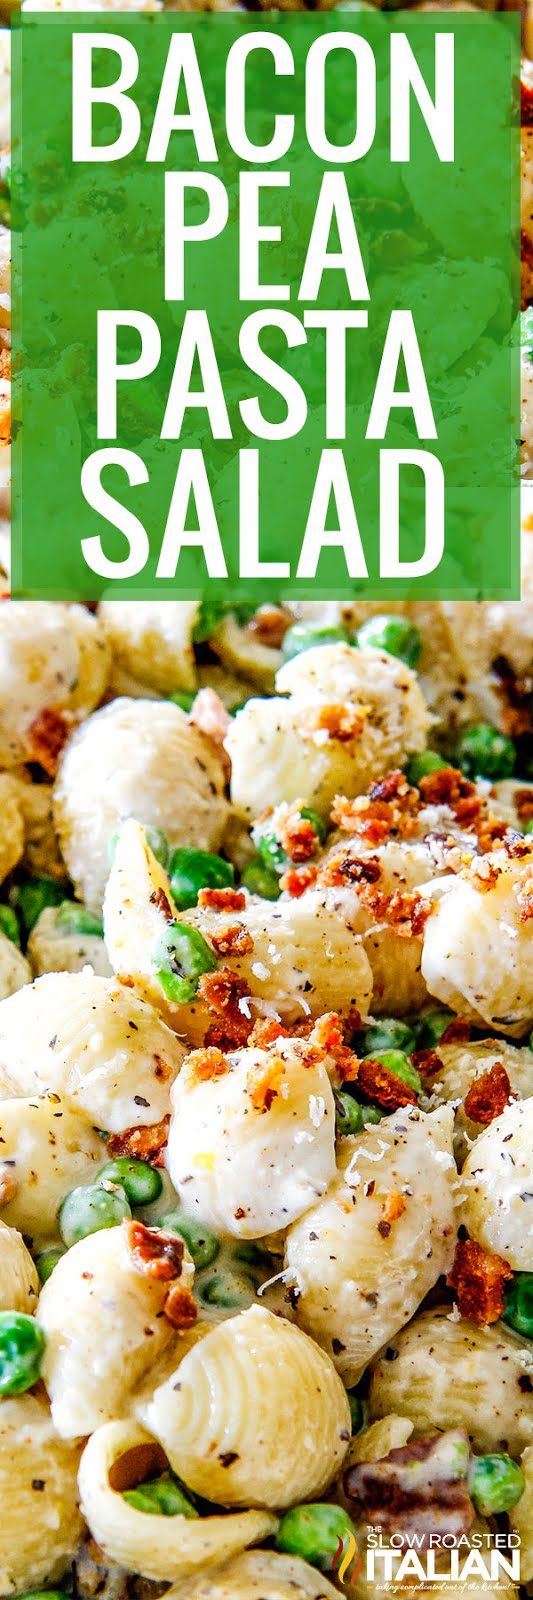 creamy pasta salad with peas and bacon -pin